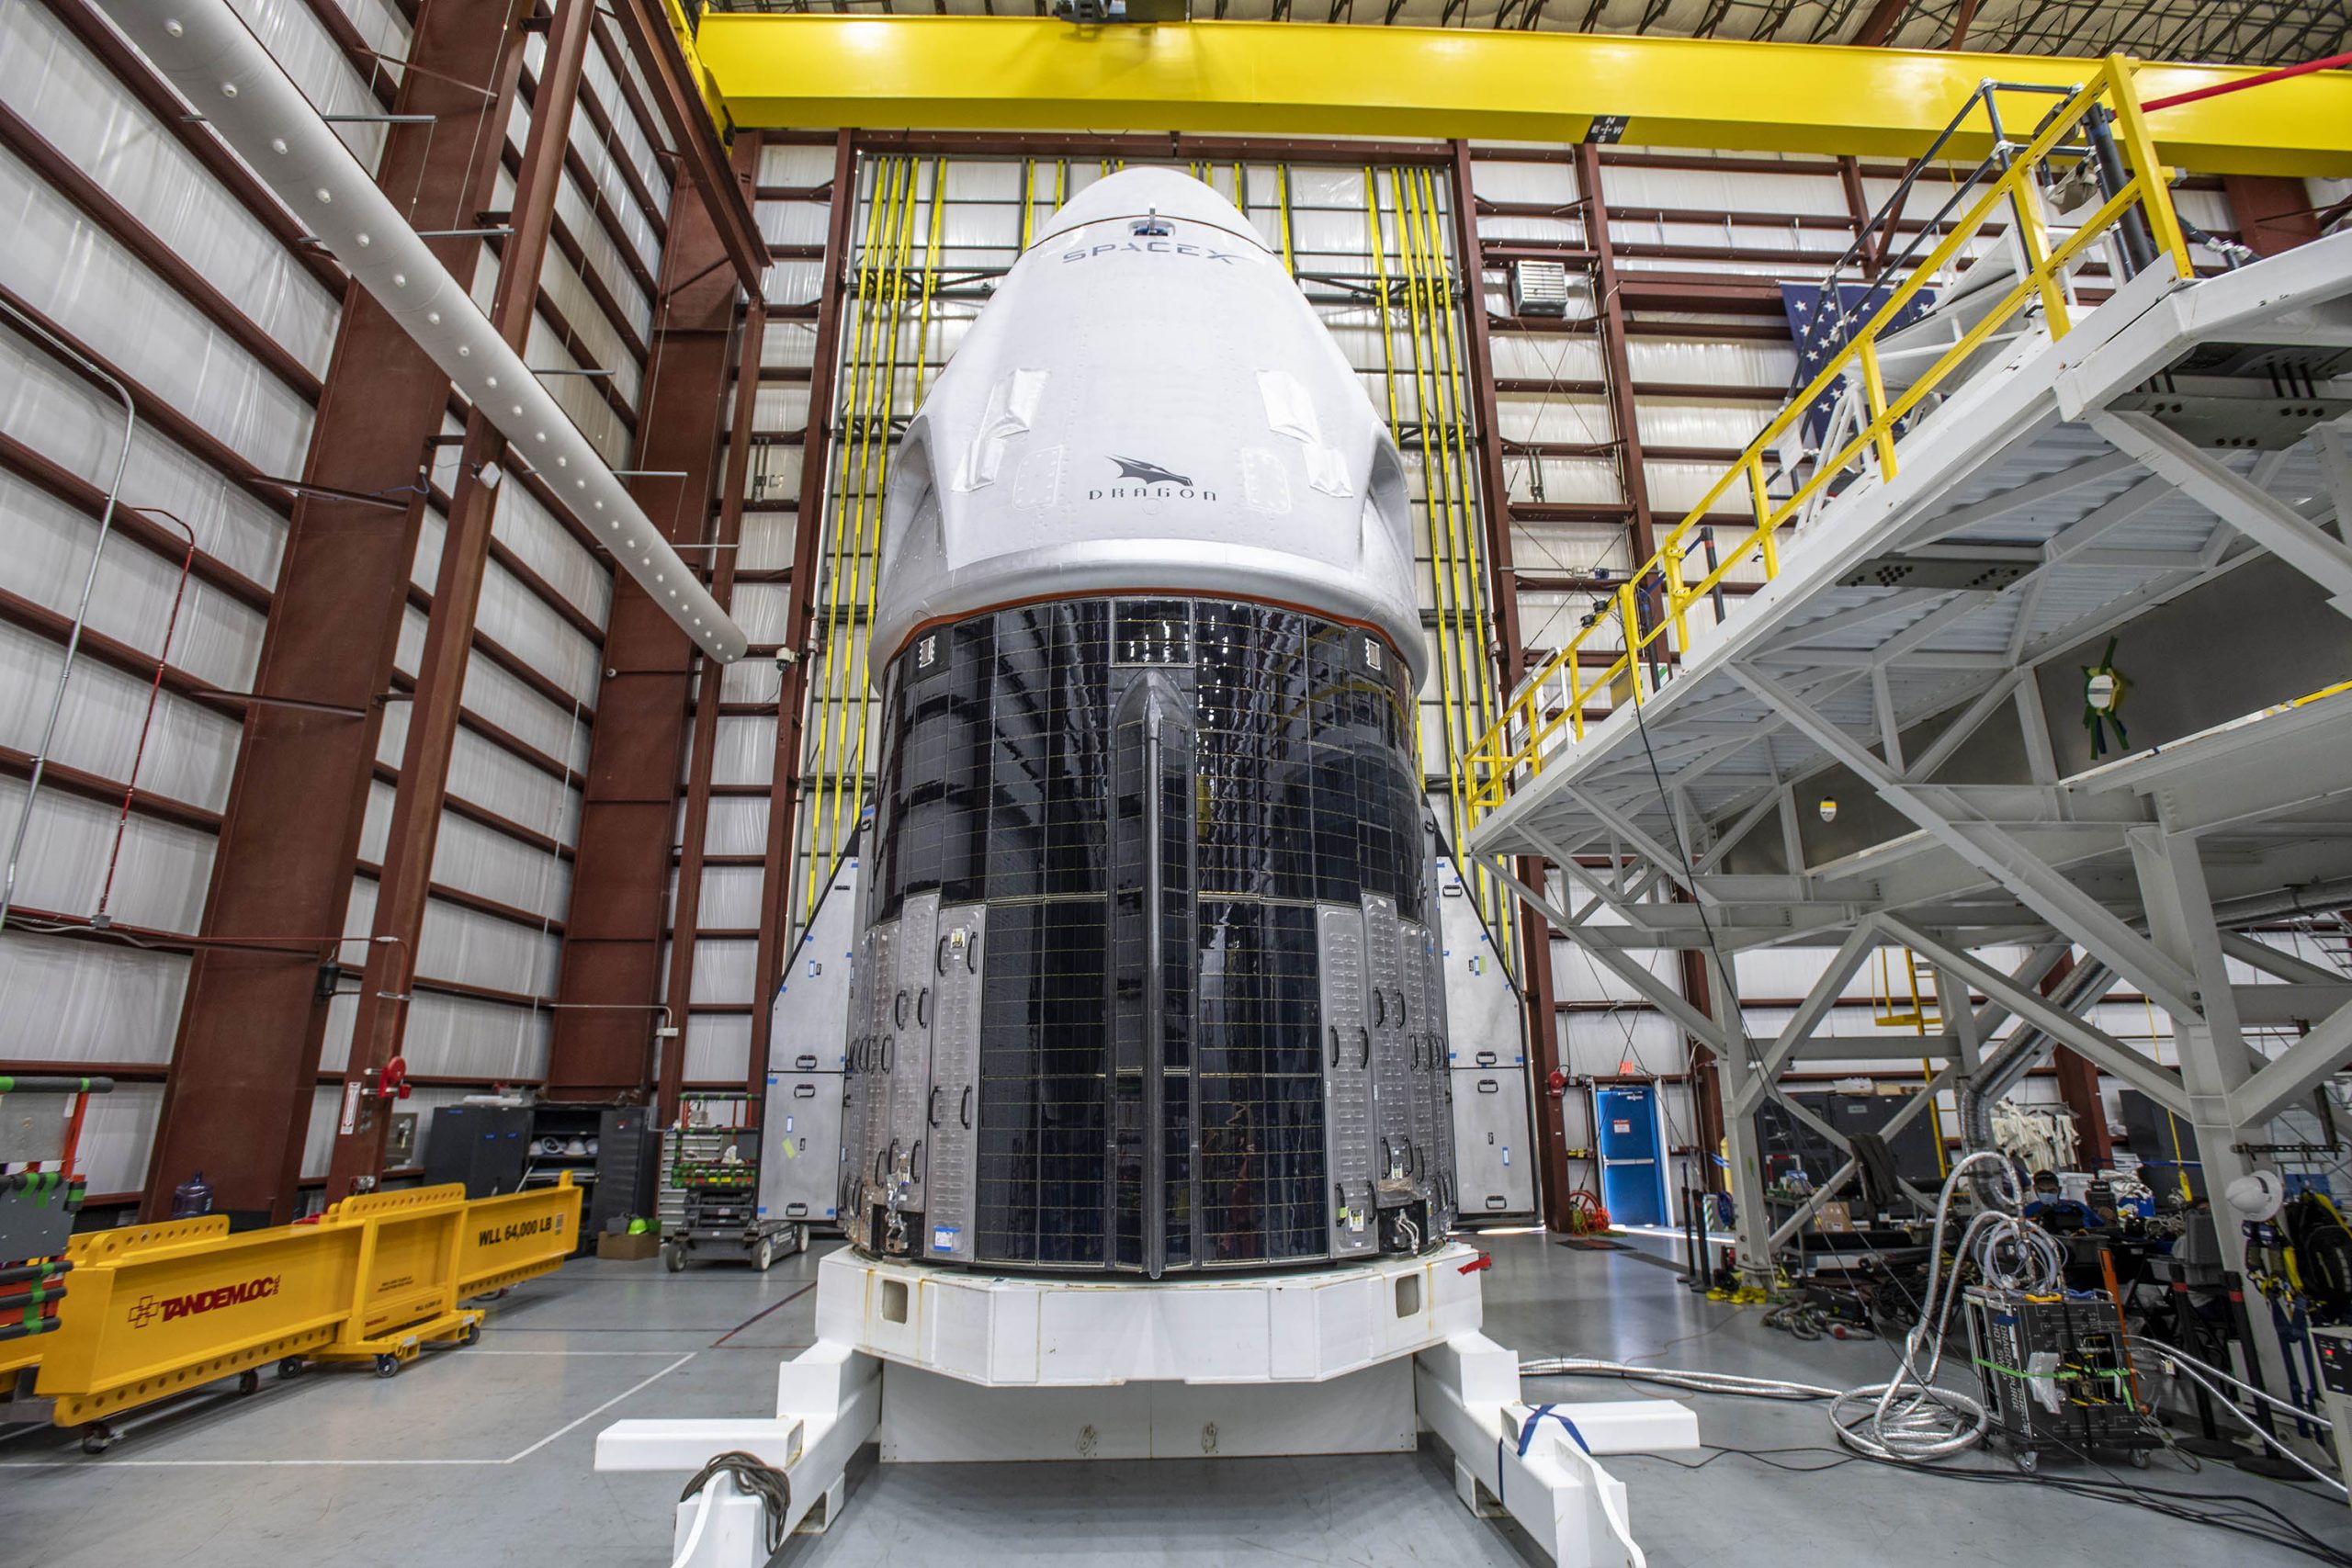 SpaceX's Crew-1 Crew Dragon spacecraft will launch the first operational business group aircraft for NASA on November 14, 2020.